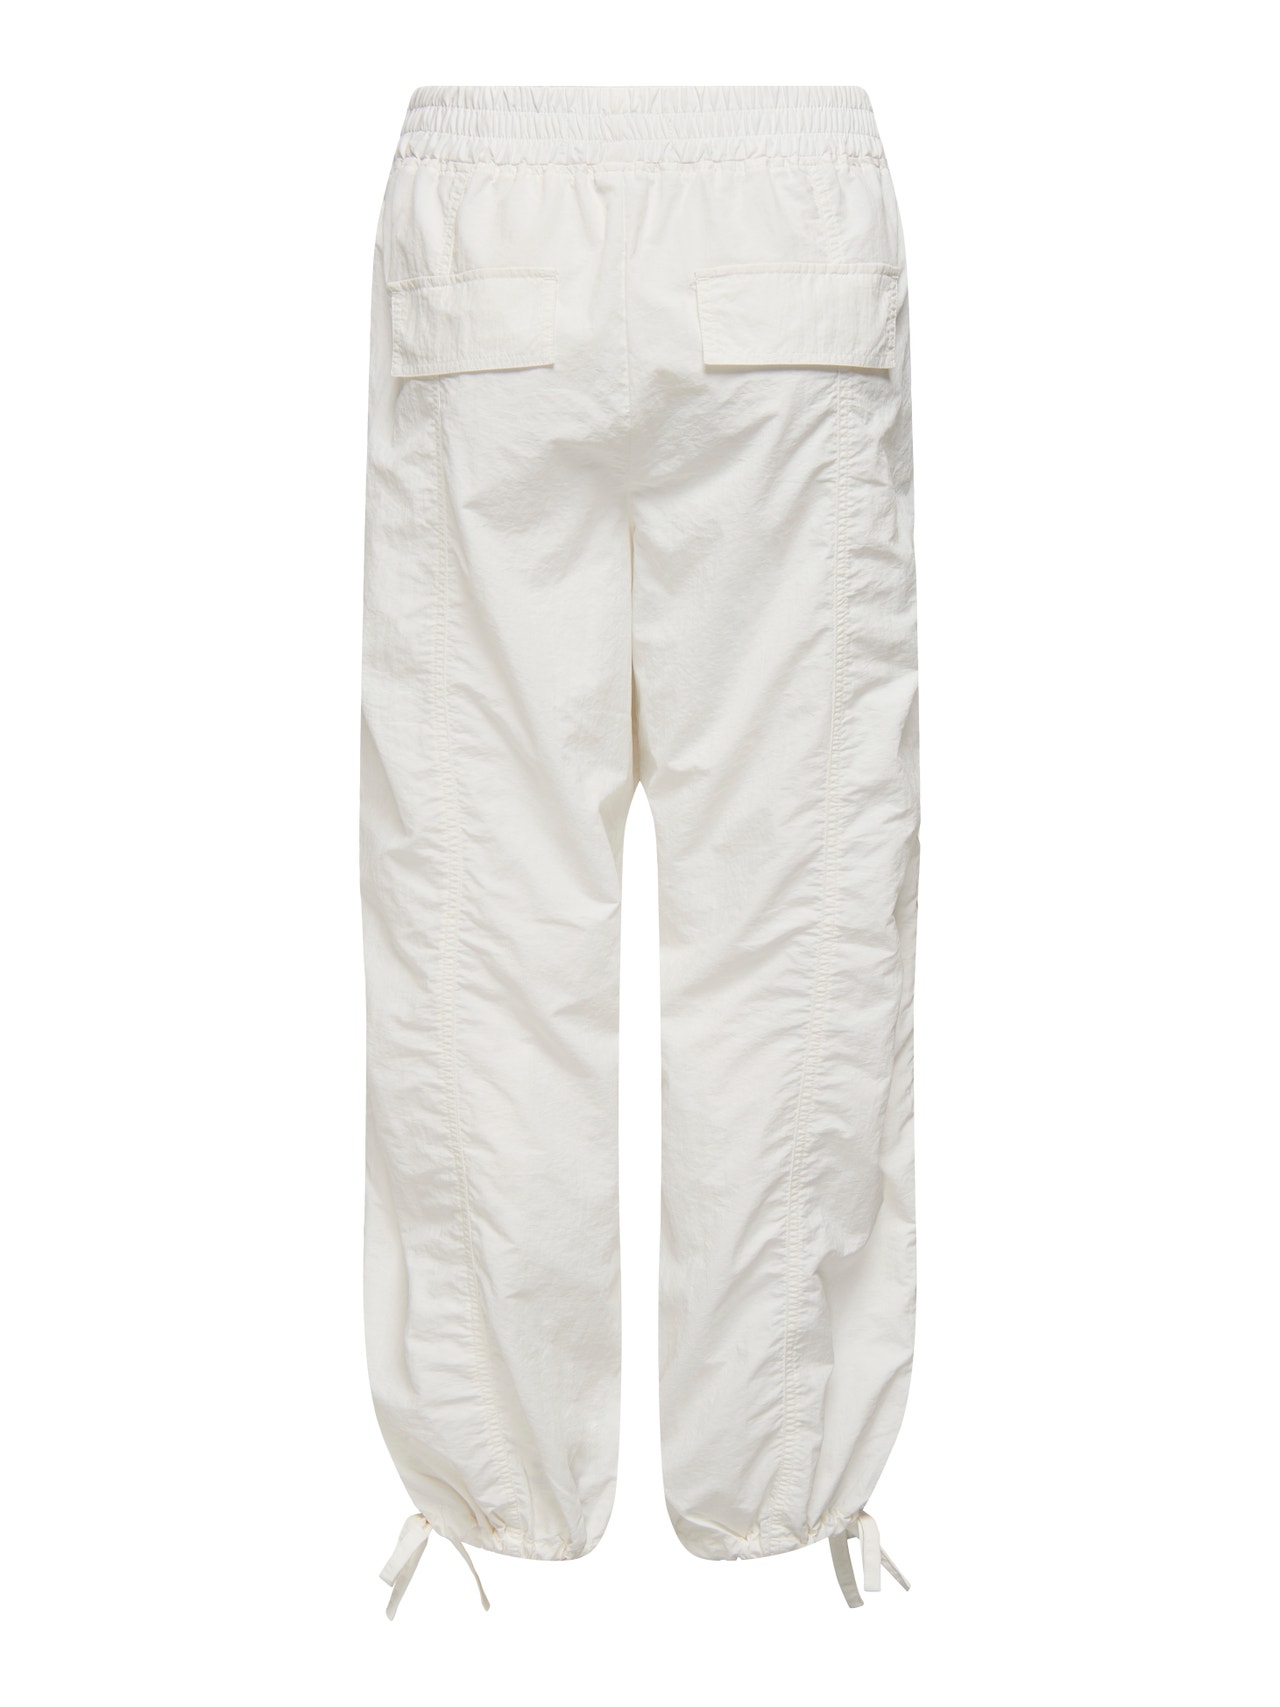 ONLY Straight Fit Mid waist Trousers -Cloud Dancer - 15302732